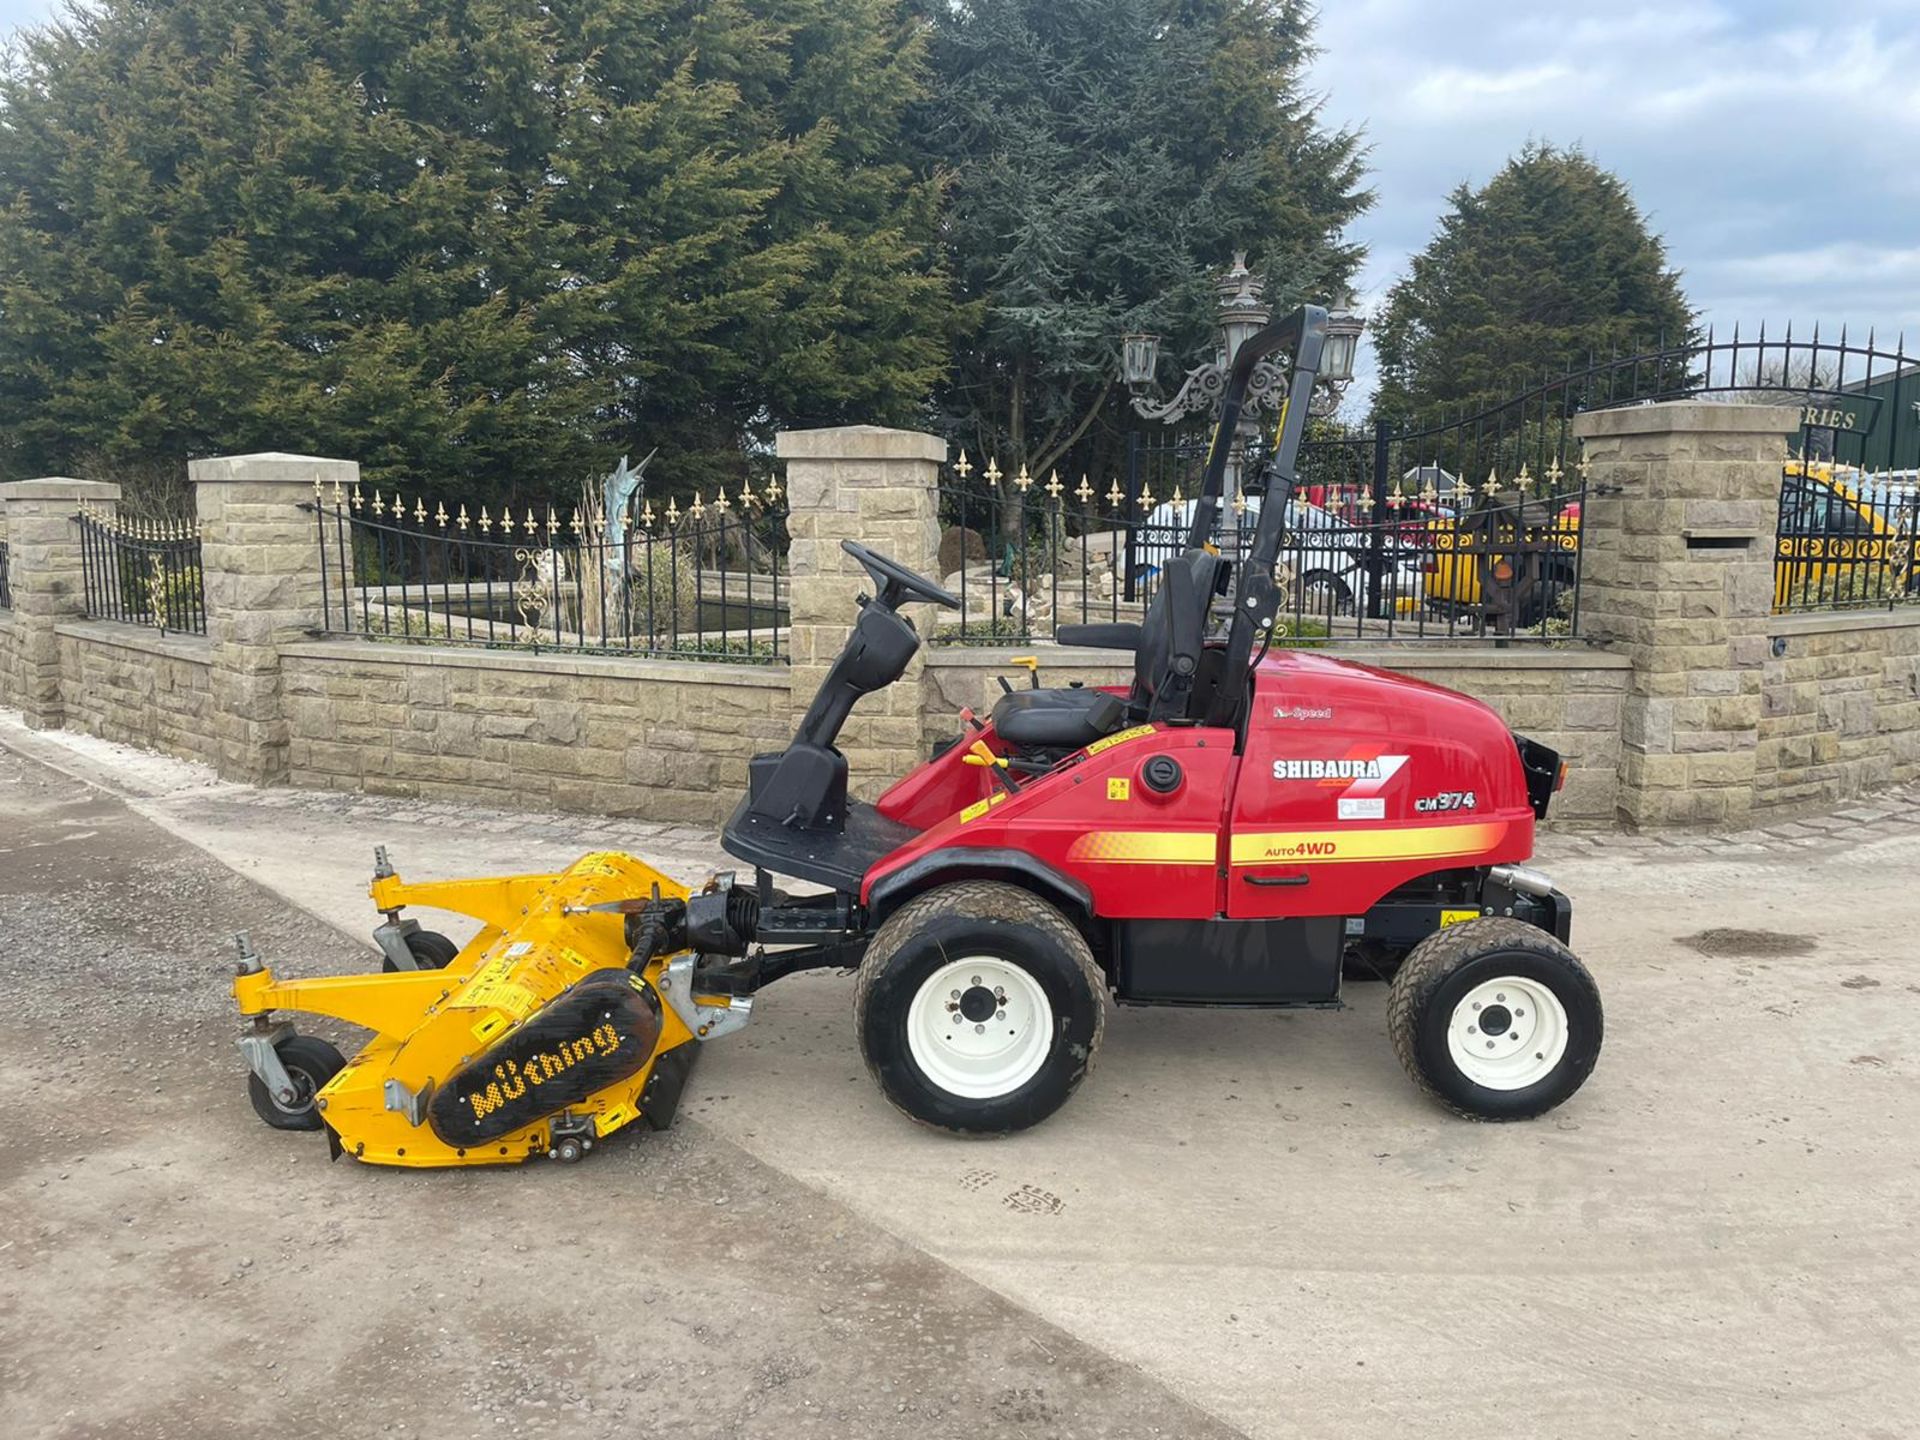 2014 SHIBAURA CM374 OUTFRONT MOWER, RUNS, DRIVES, CUTS, IN GOOD CONDITION, LOW 1450 HOURS *PLUS VAT*